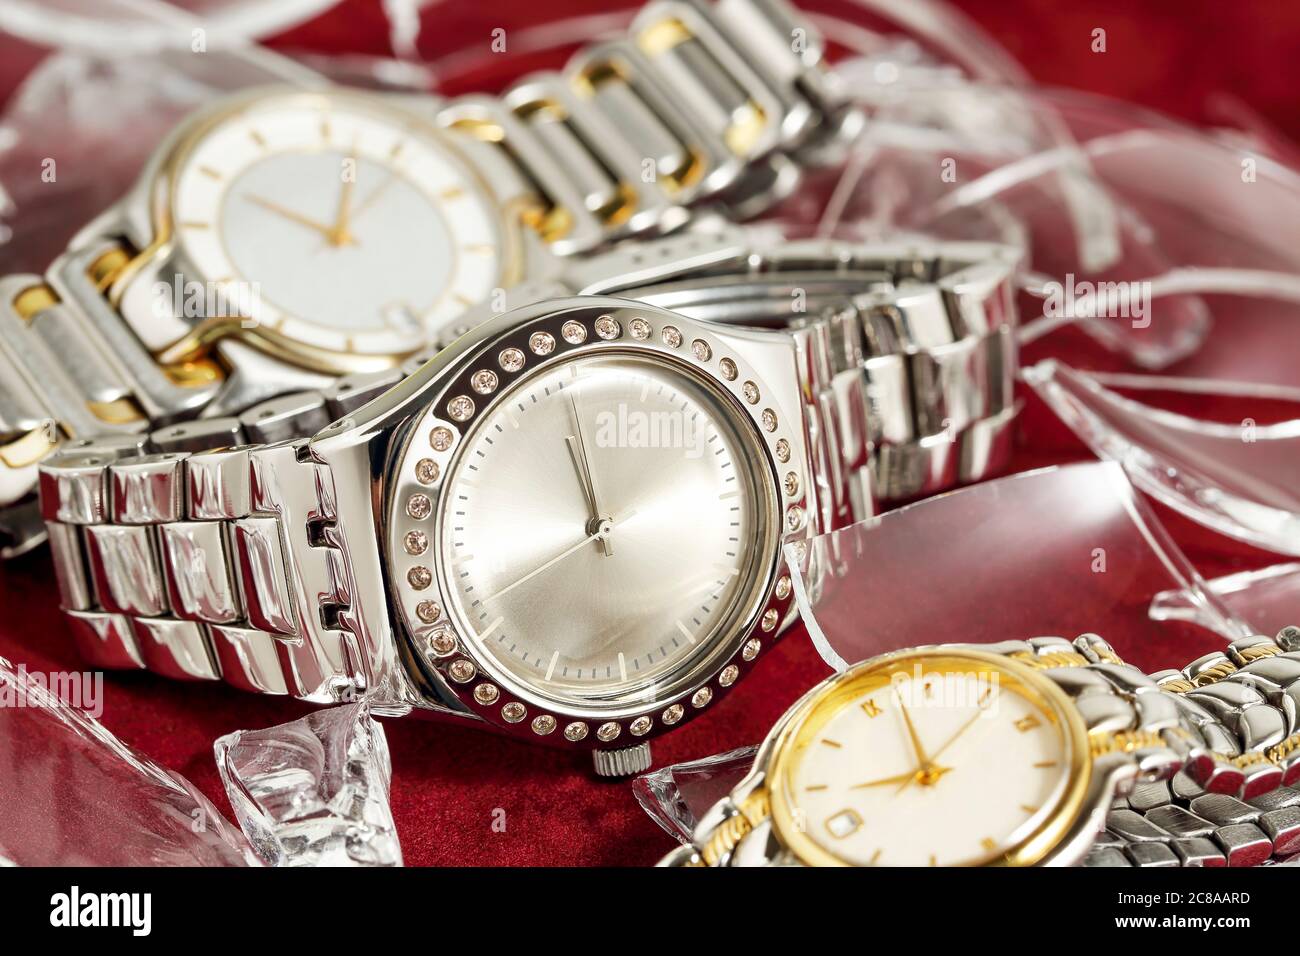 glamorous watches with pieces of broken glass Stock Photo - Alamy